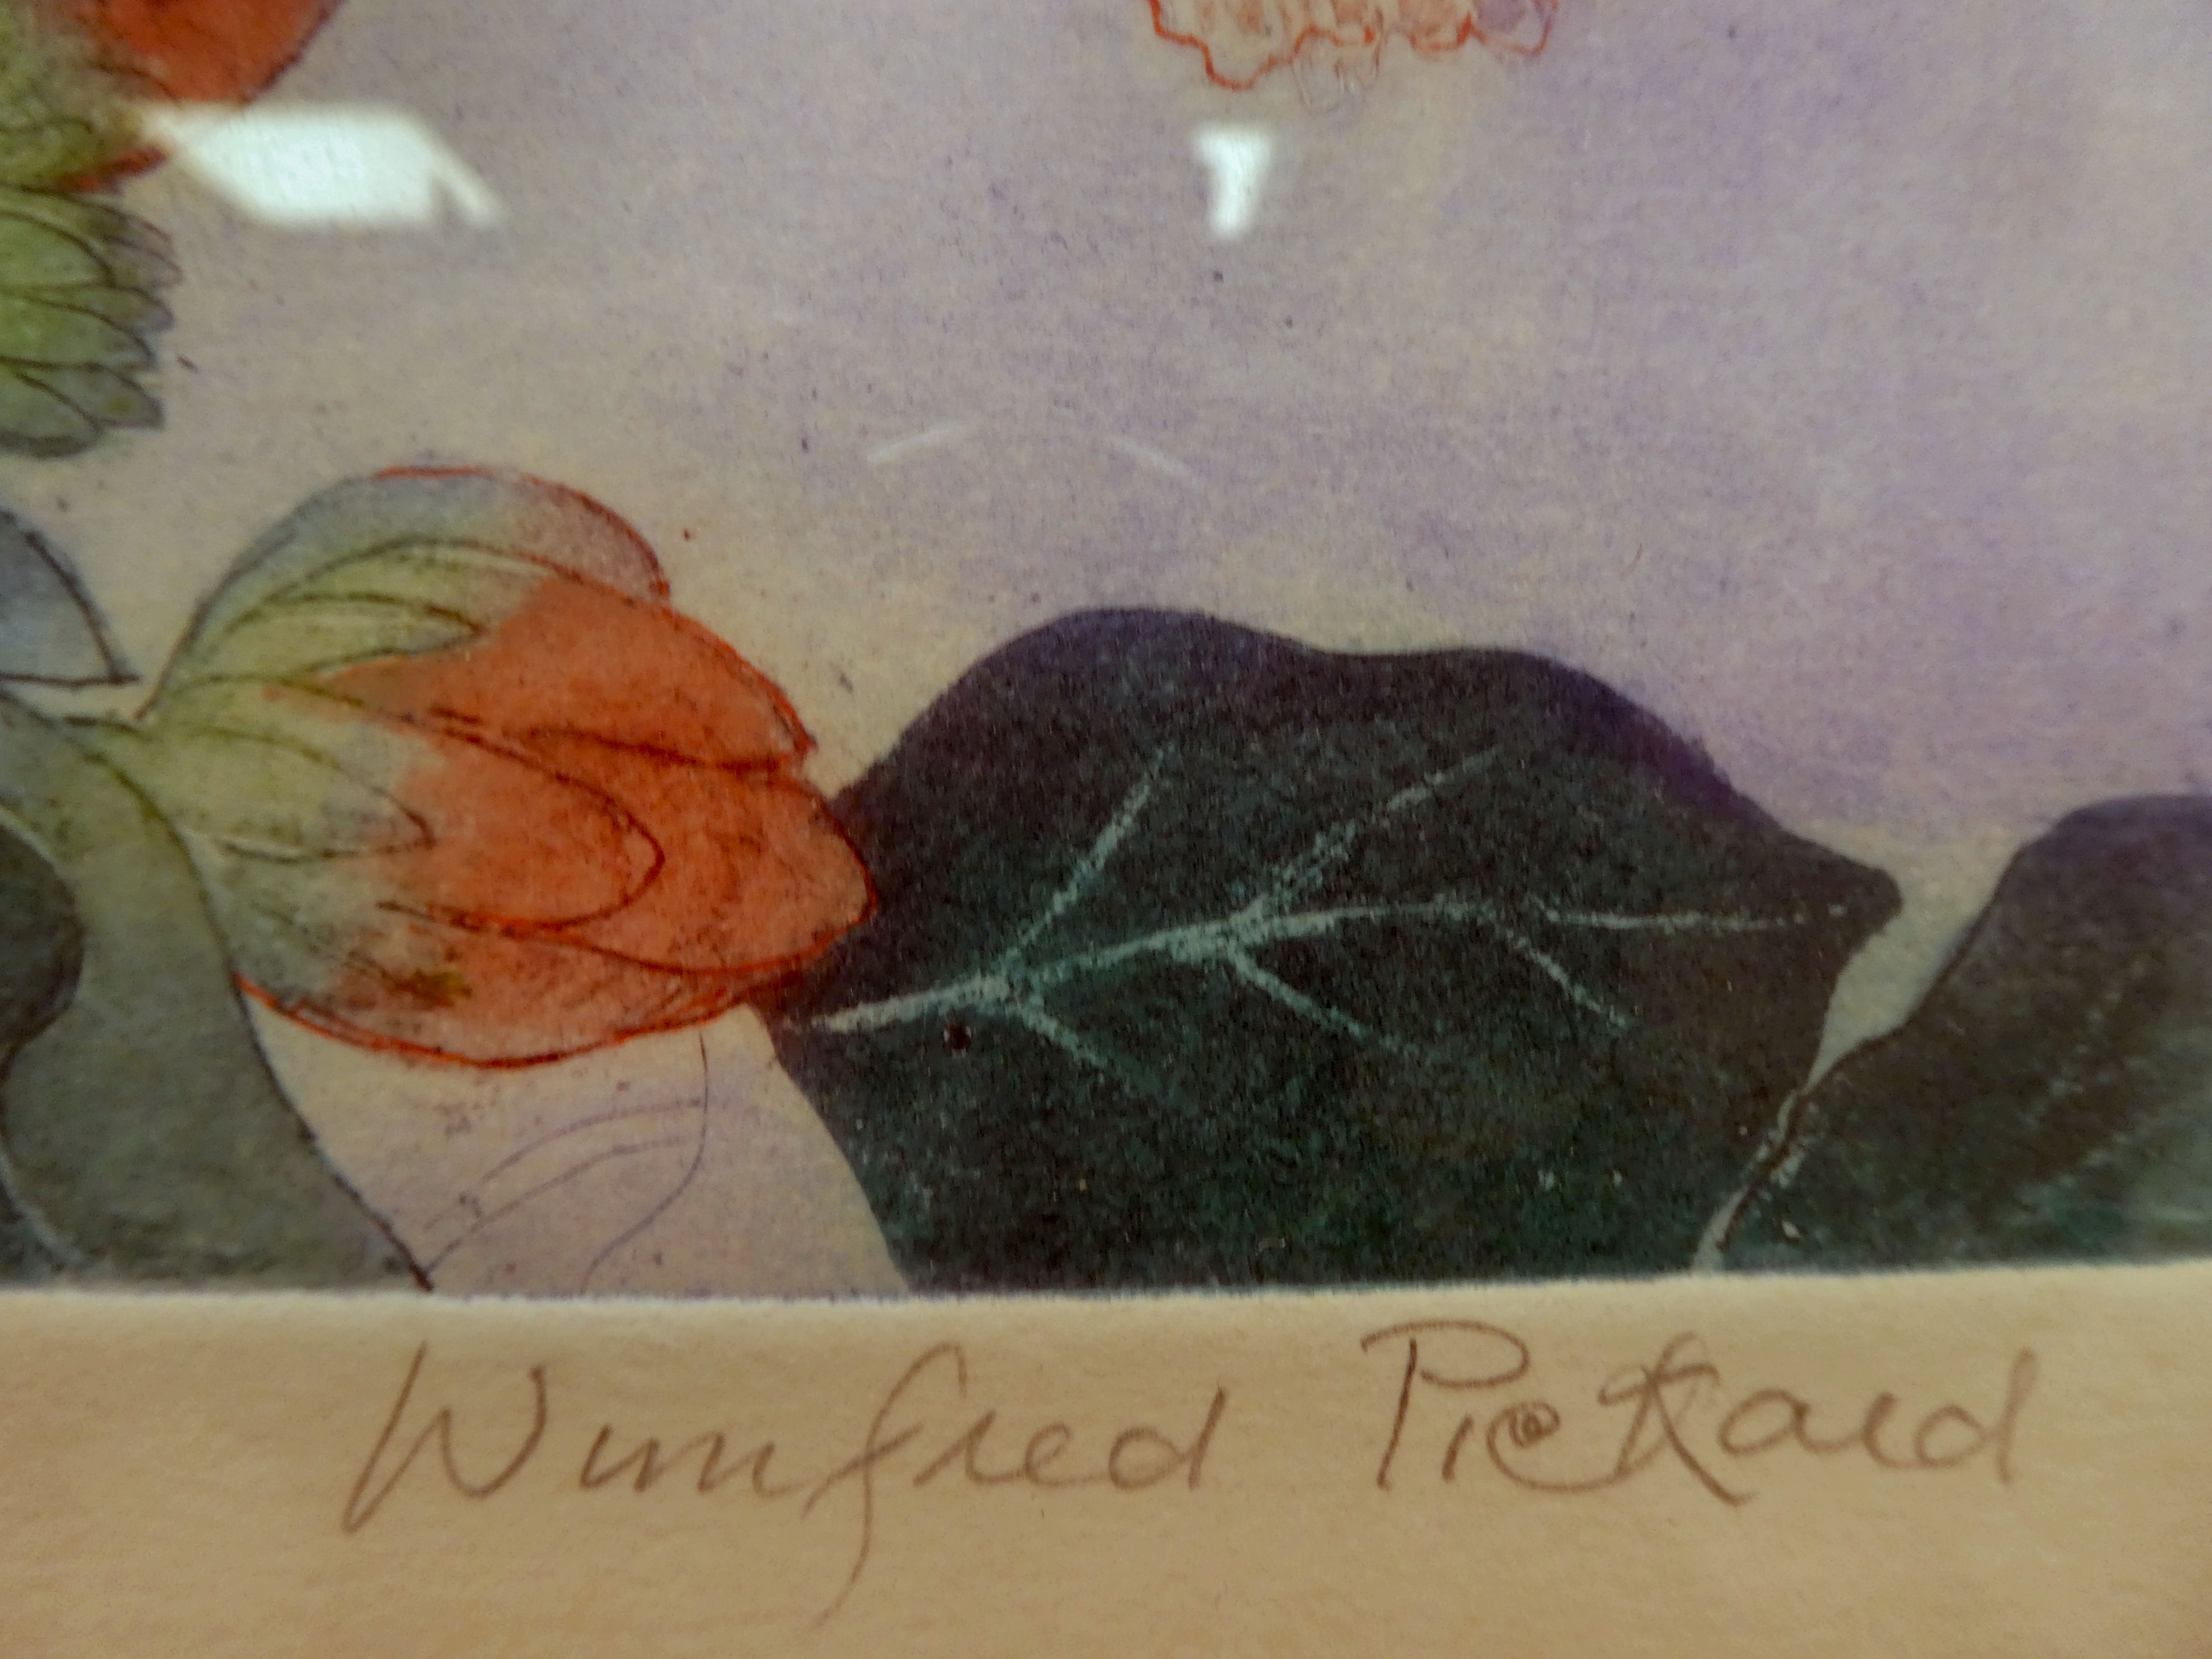 Winifred Pickard - 'Two Hummingbirds'  etching with aquatint  bears a pencil inscription (24/ - Image 4 of 5